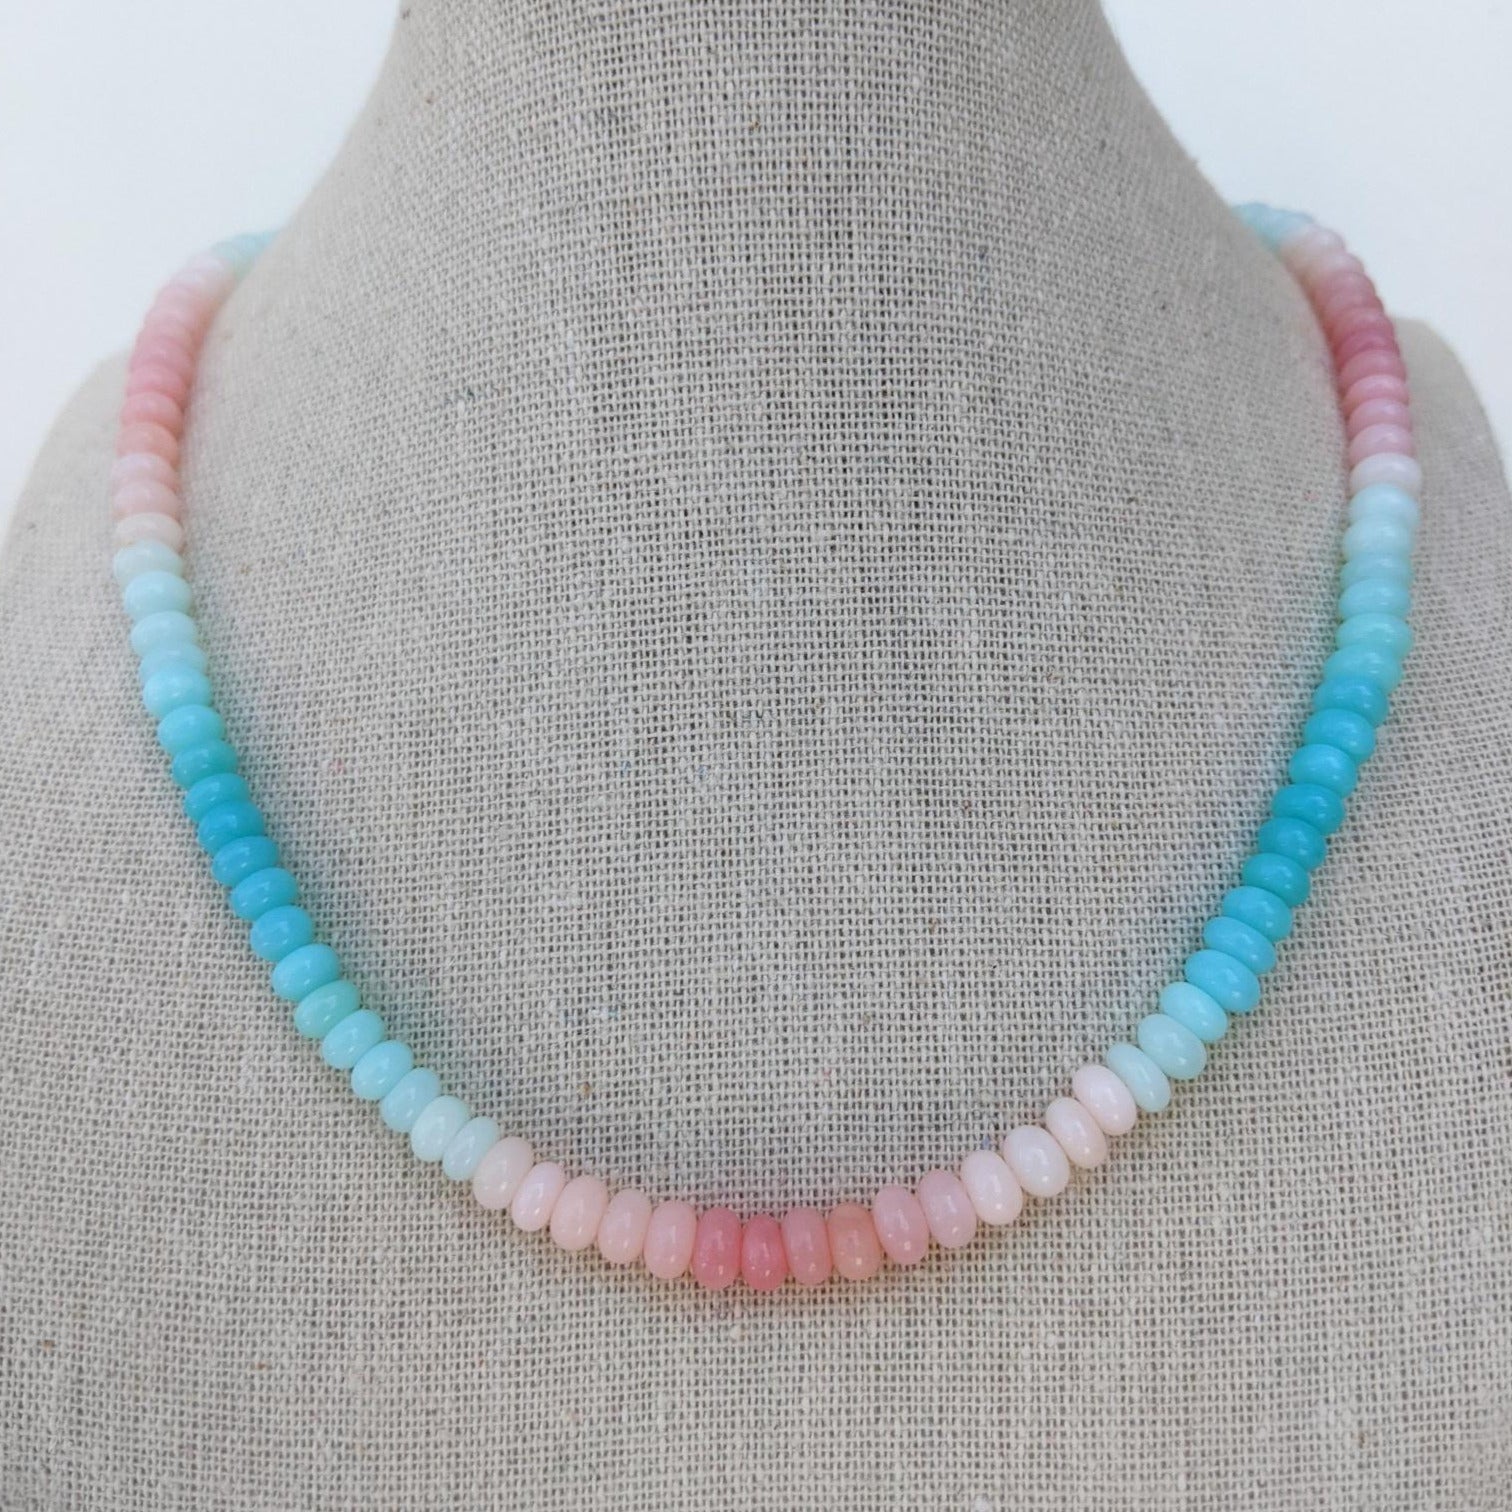 Up To 75% Off on Cotton Candy Glass Rock Necklace